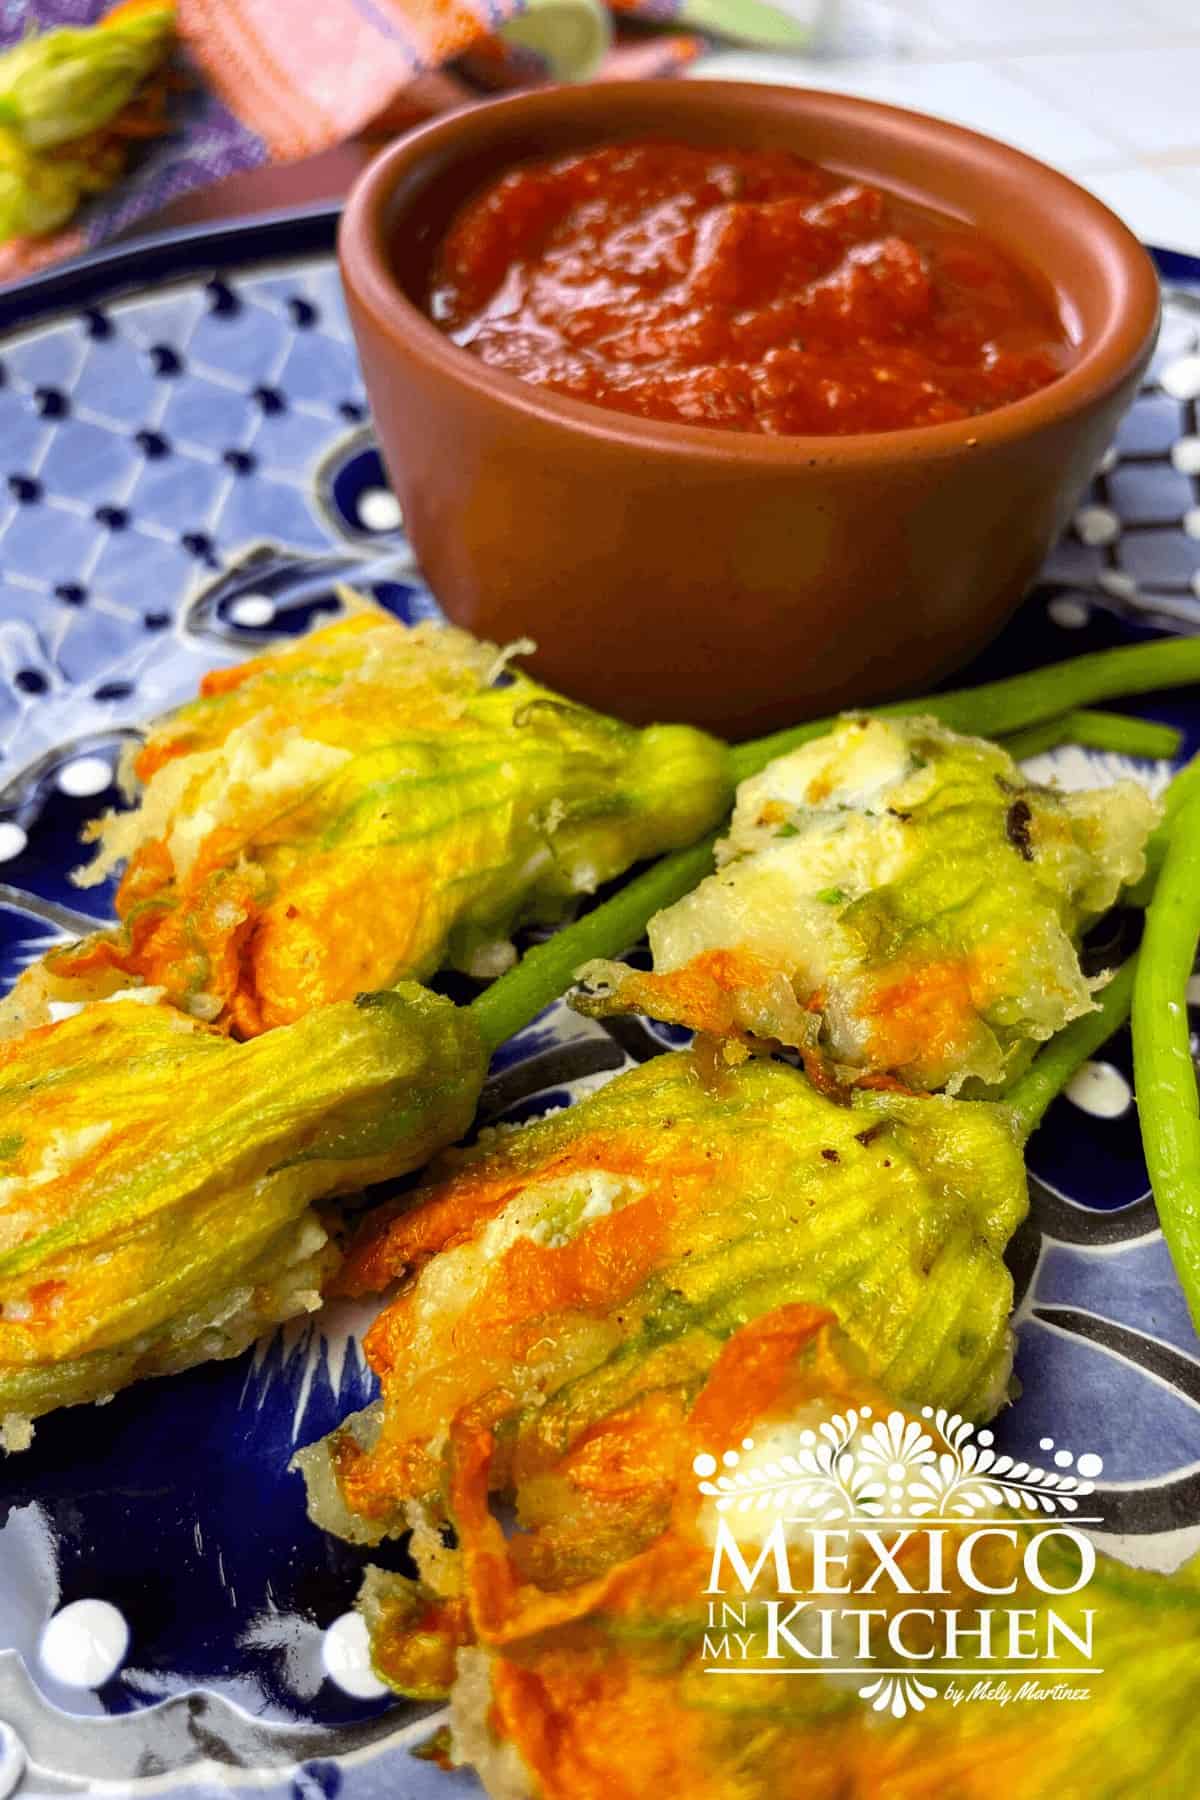 Stuffed blossoms on a plate with sauce